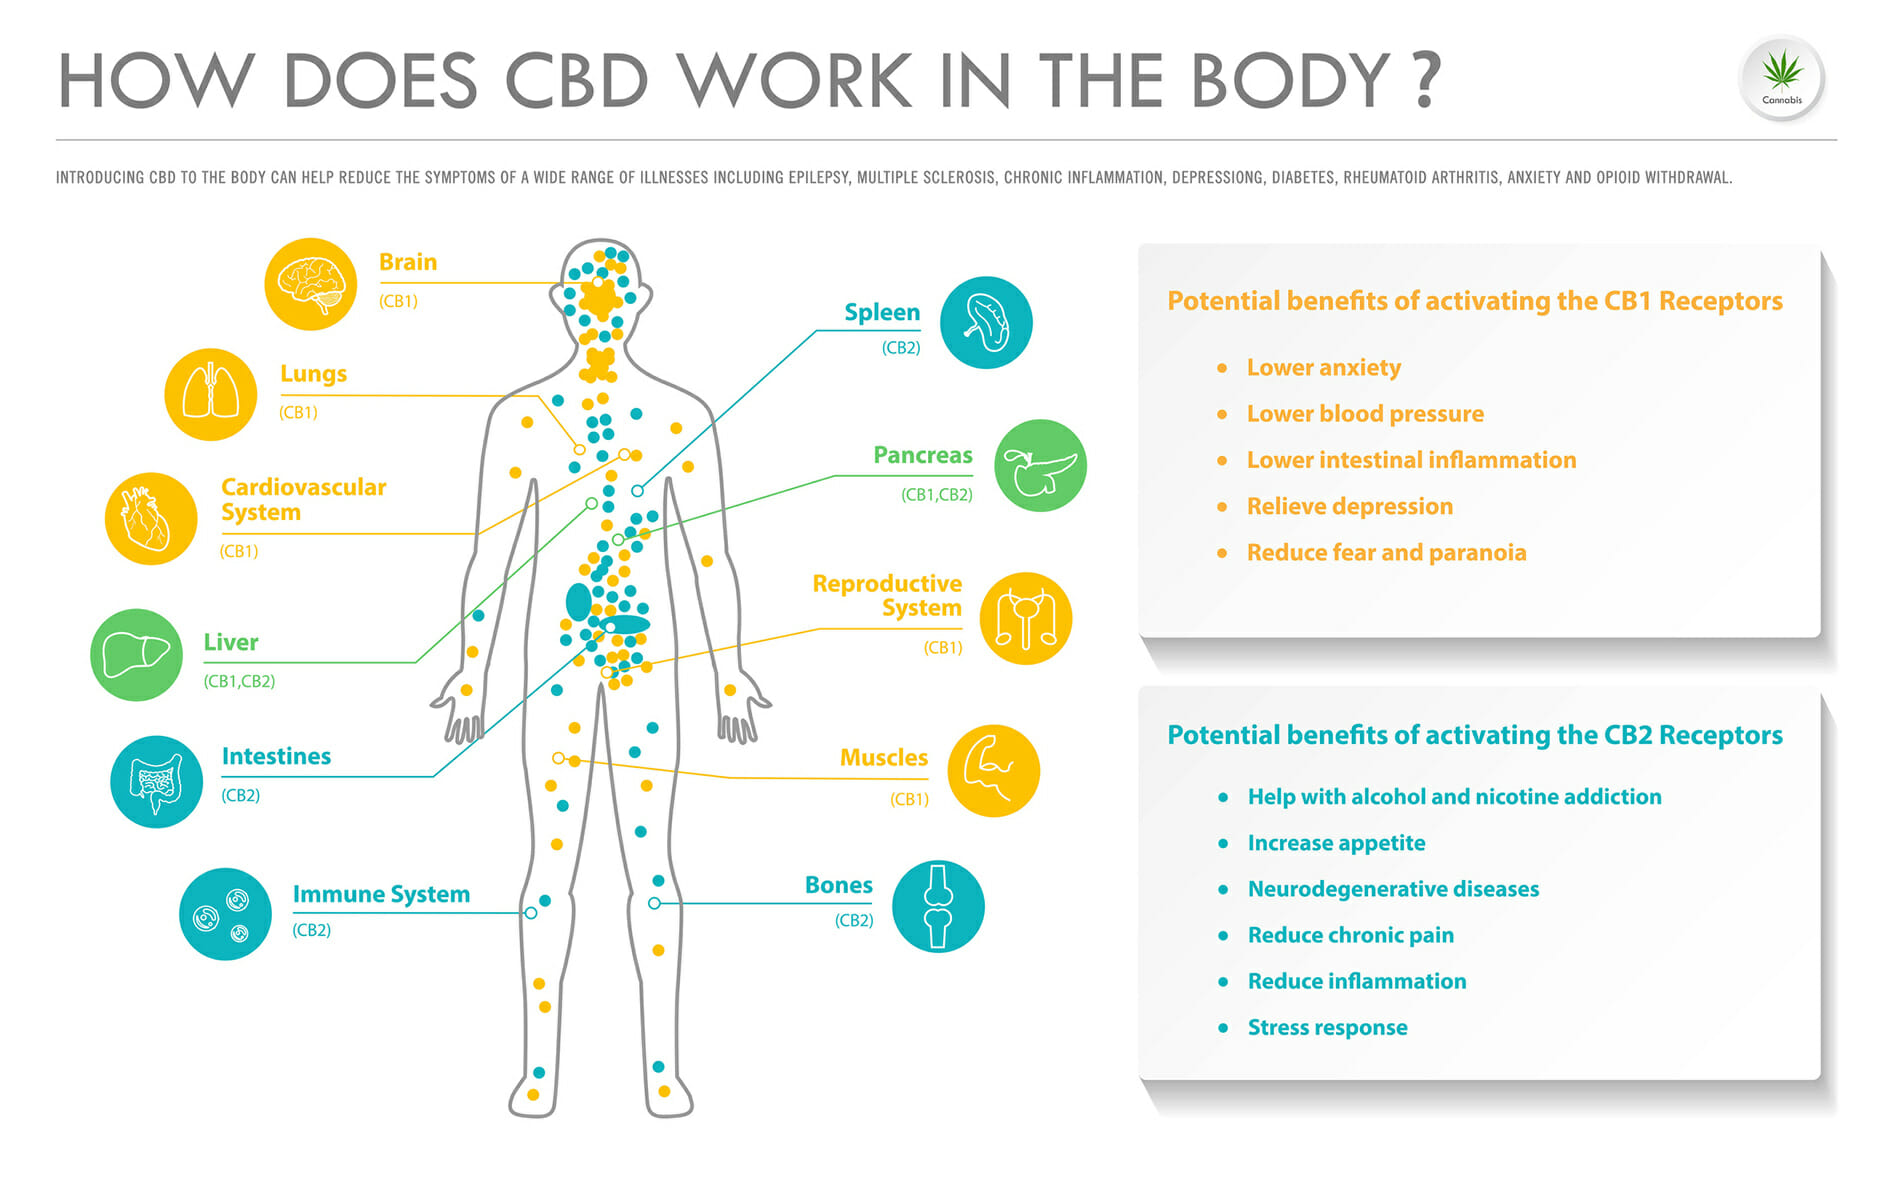 How Does CBD Work In the Body